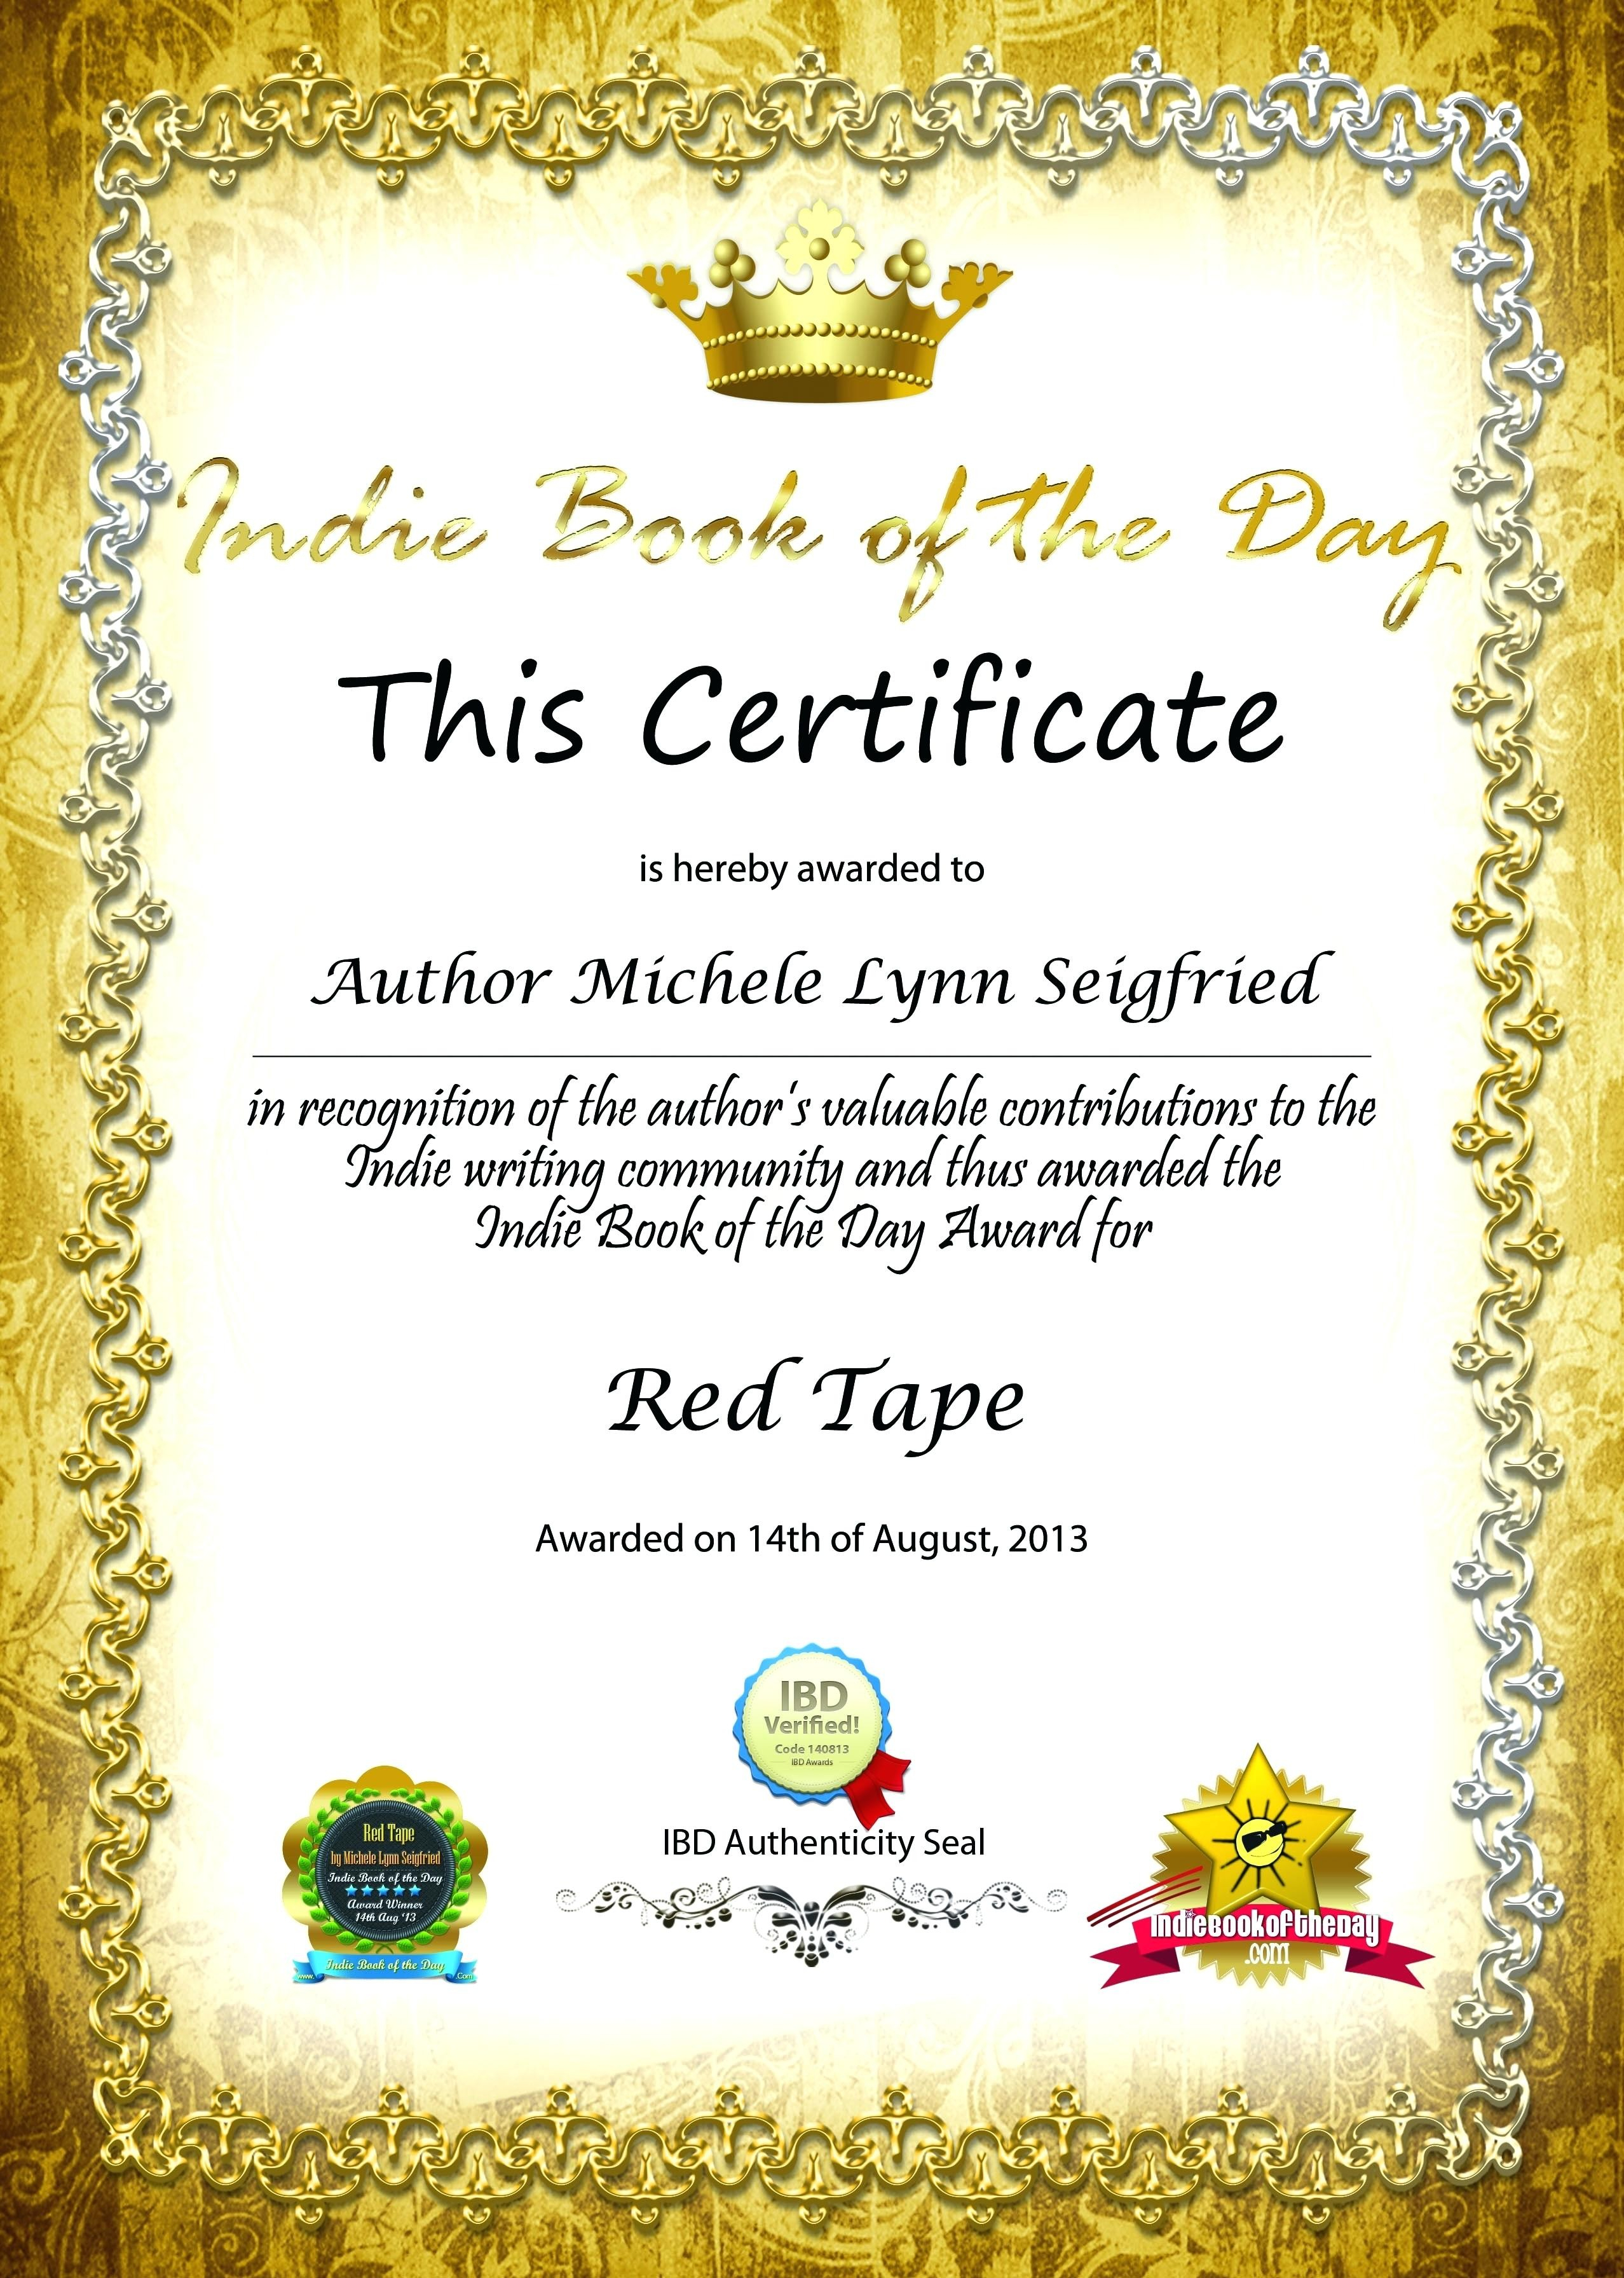 Collection Of Solutions For Spelling Bee Award Certificate For Spelling Bee Award Certificate Template